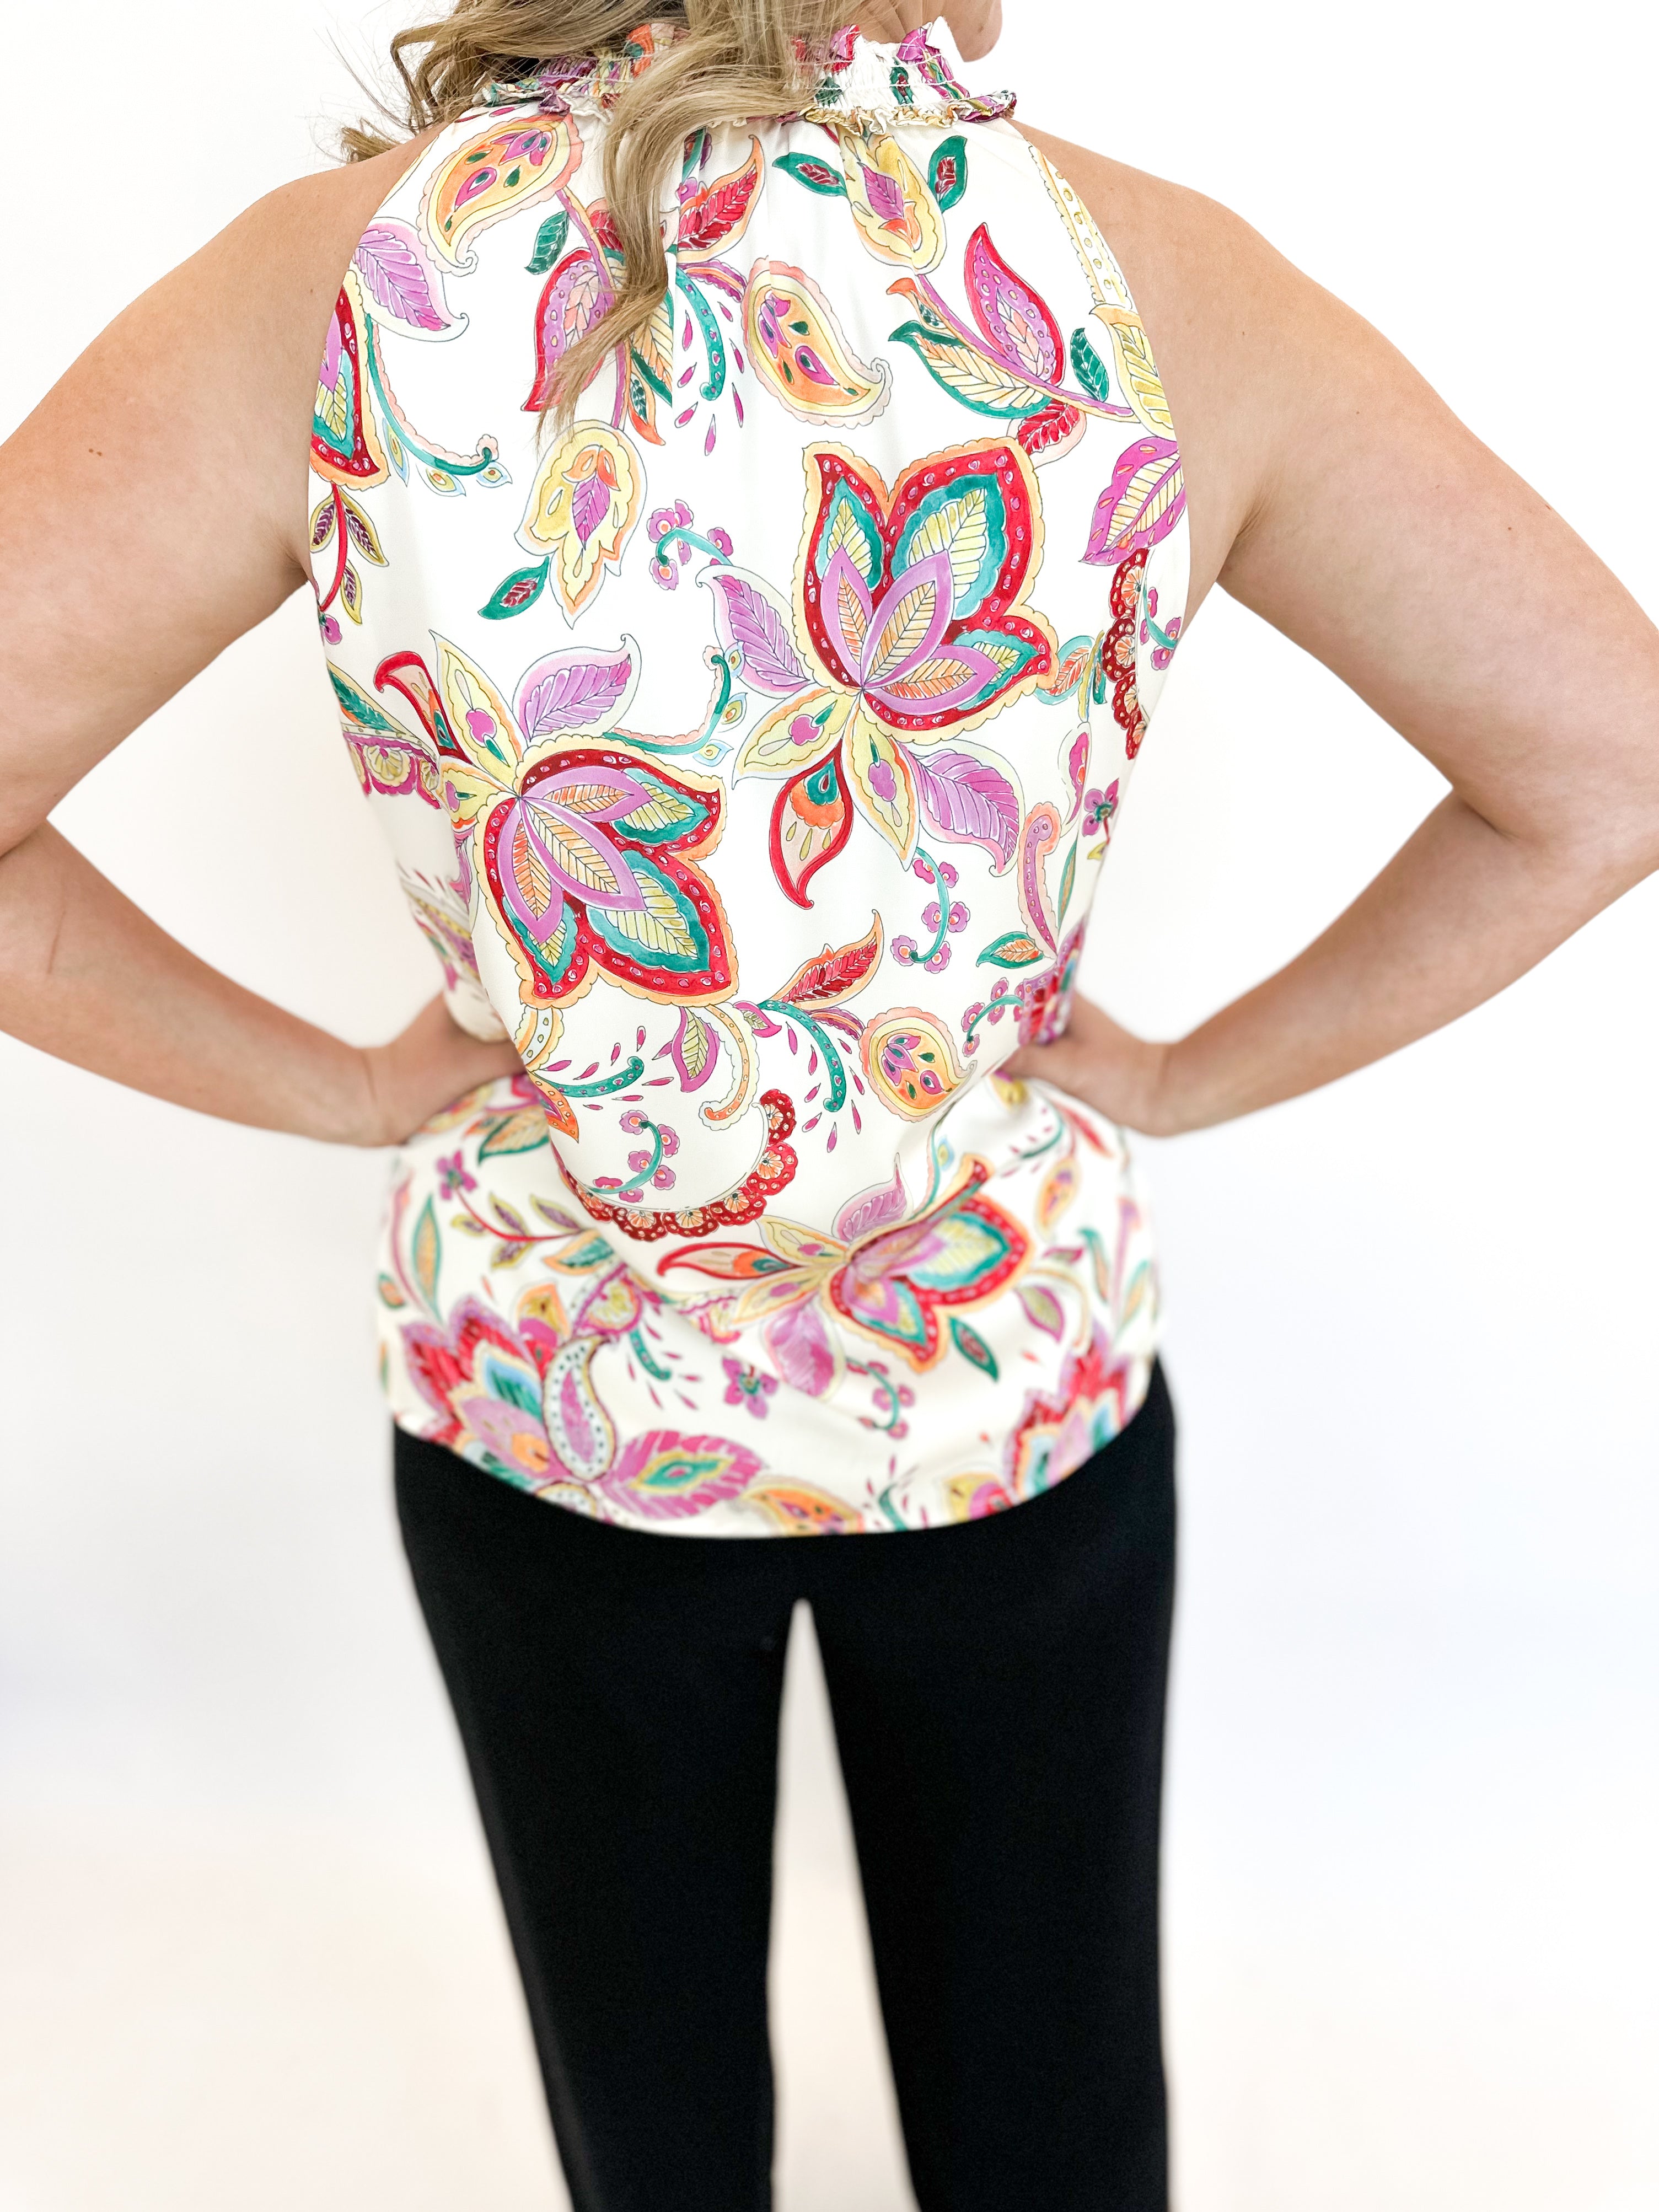 Paisley & Floral Cami - THML-200 Fashion Blouses-THML-July & June Women's Fashion Boutique Located in San Antonio, Texas